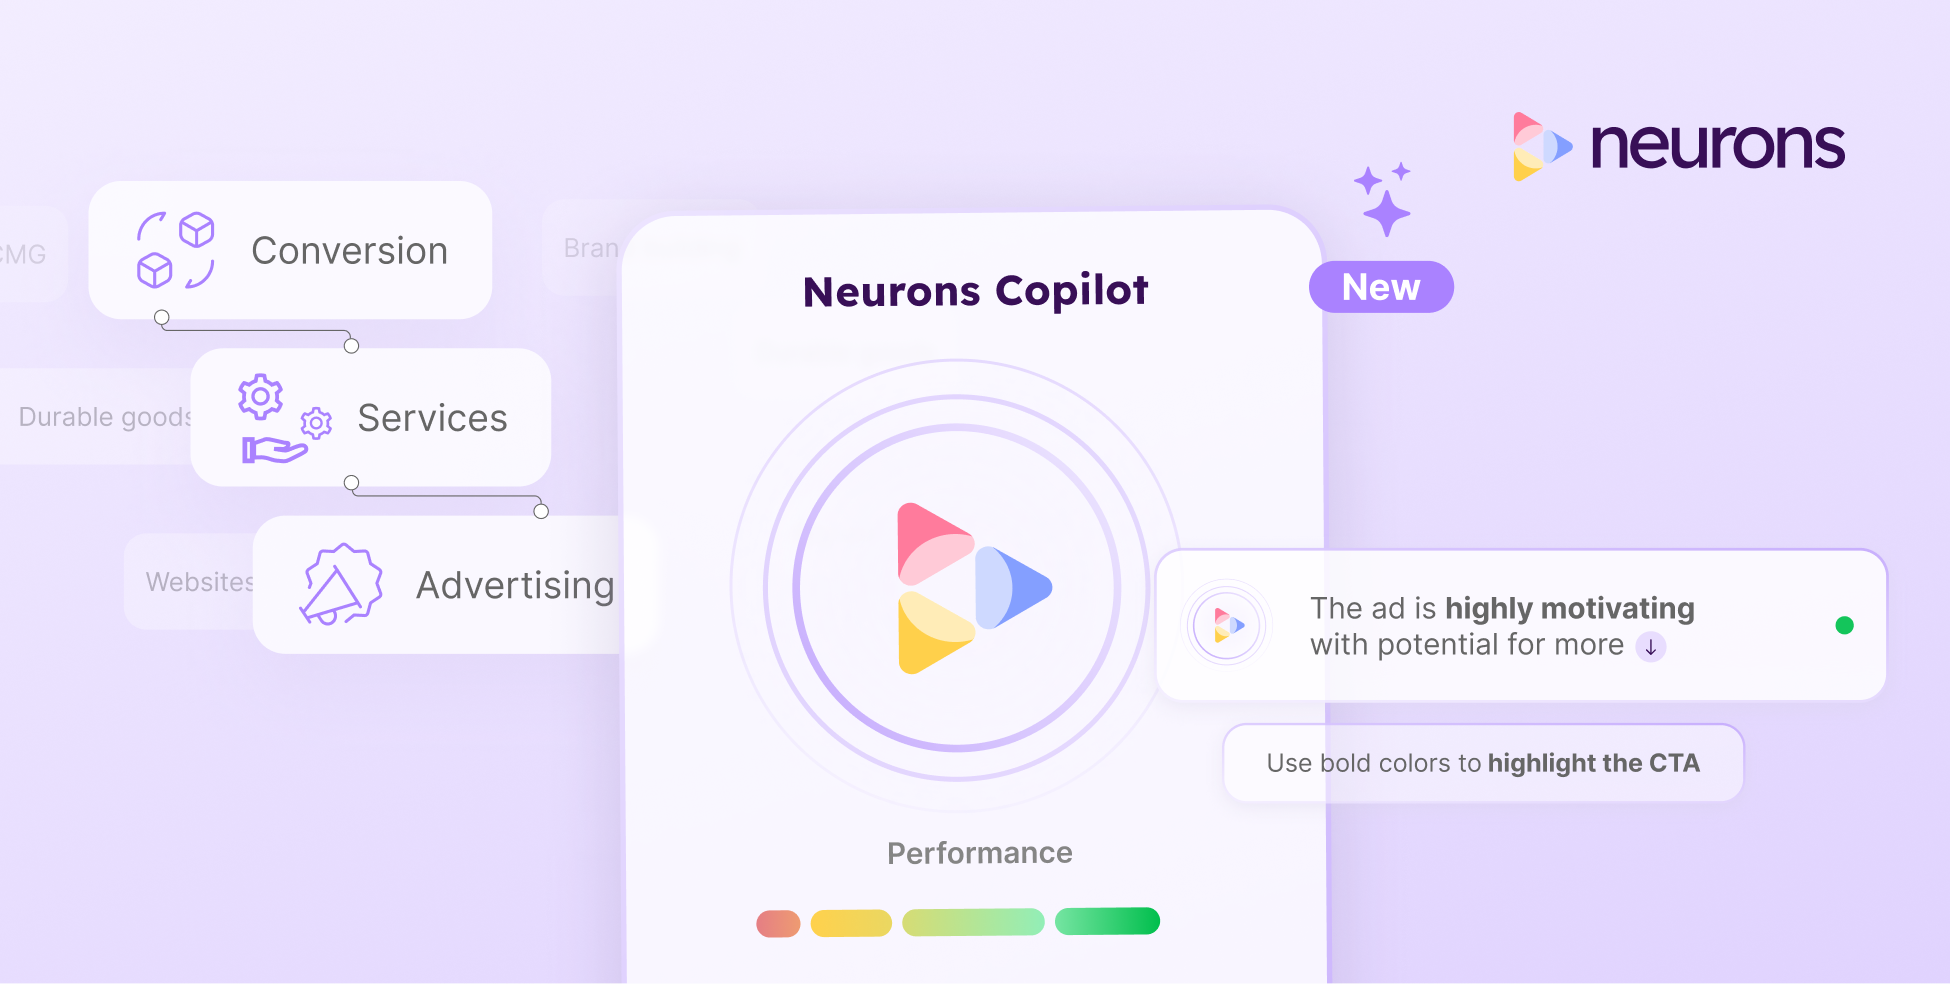 Neurons introduces Copilot, a new suggestive add-on to their AI product.